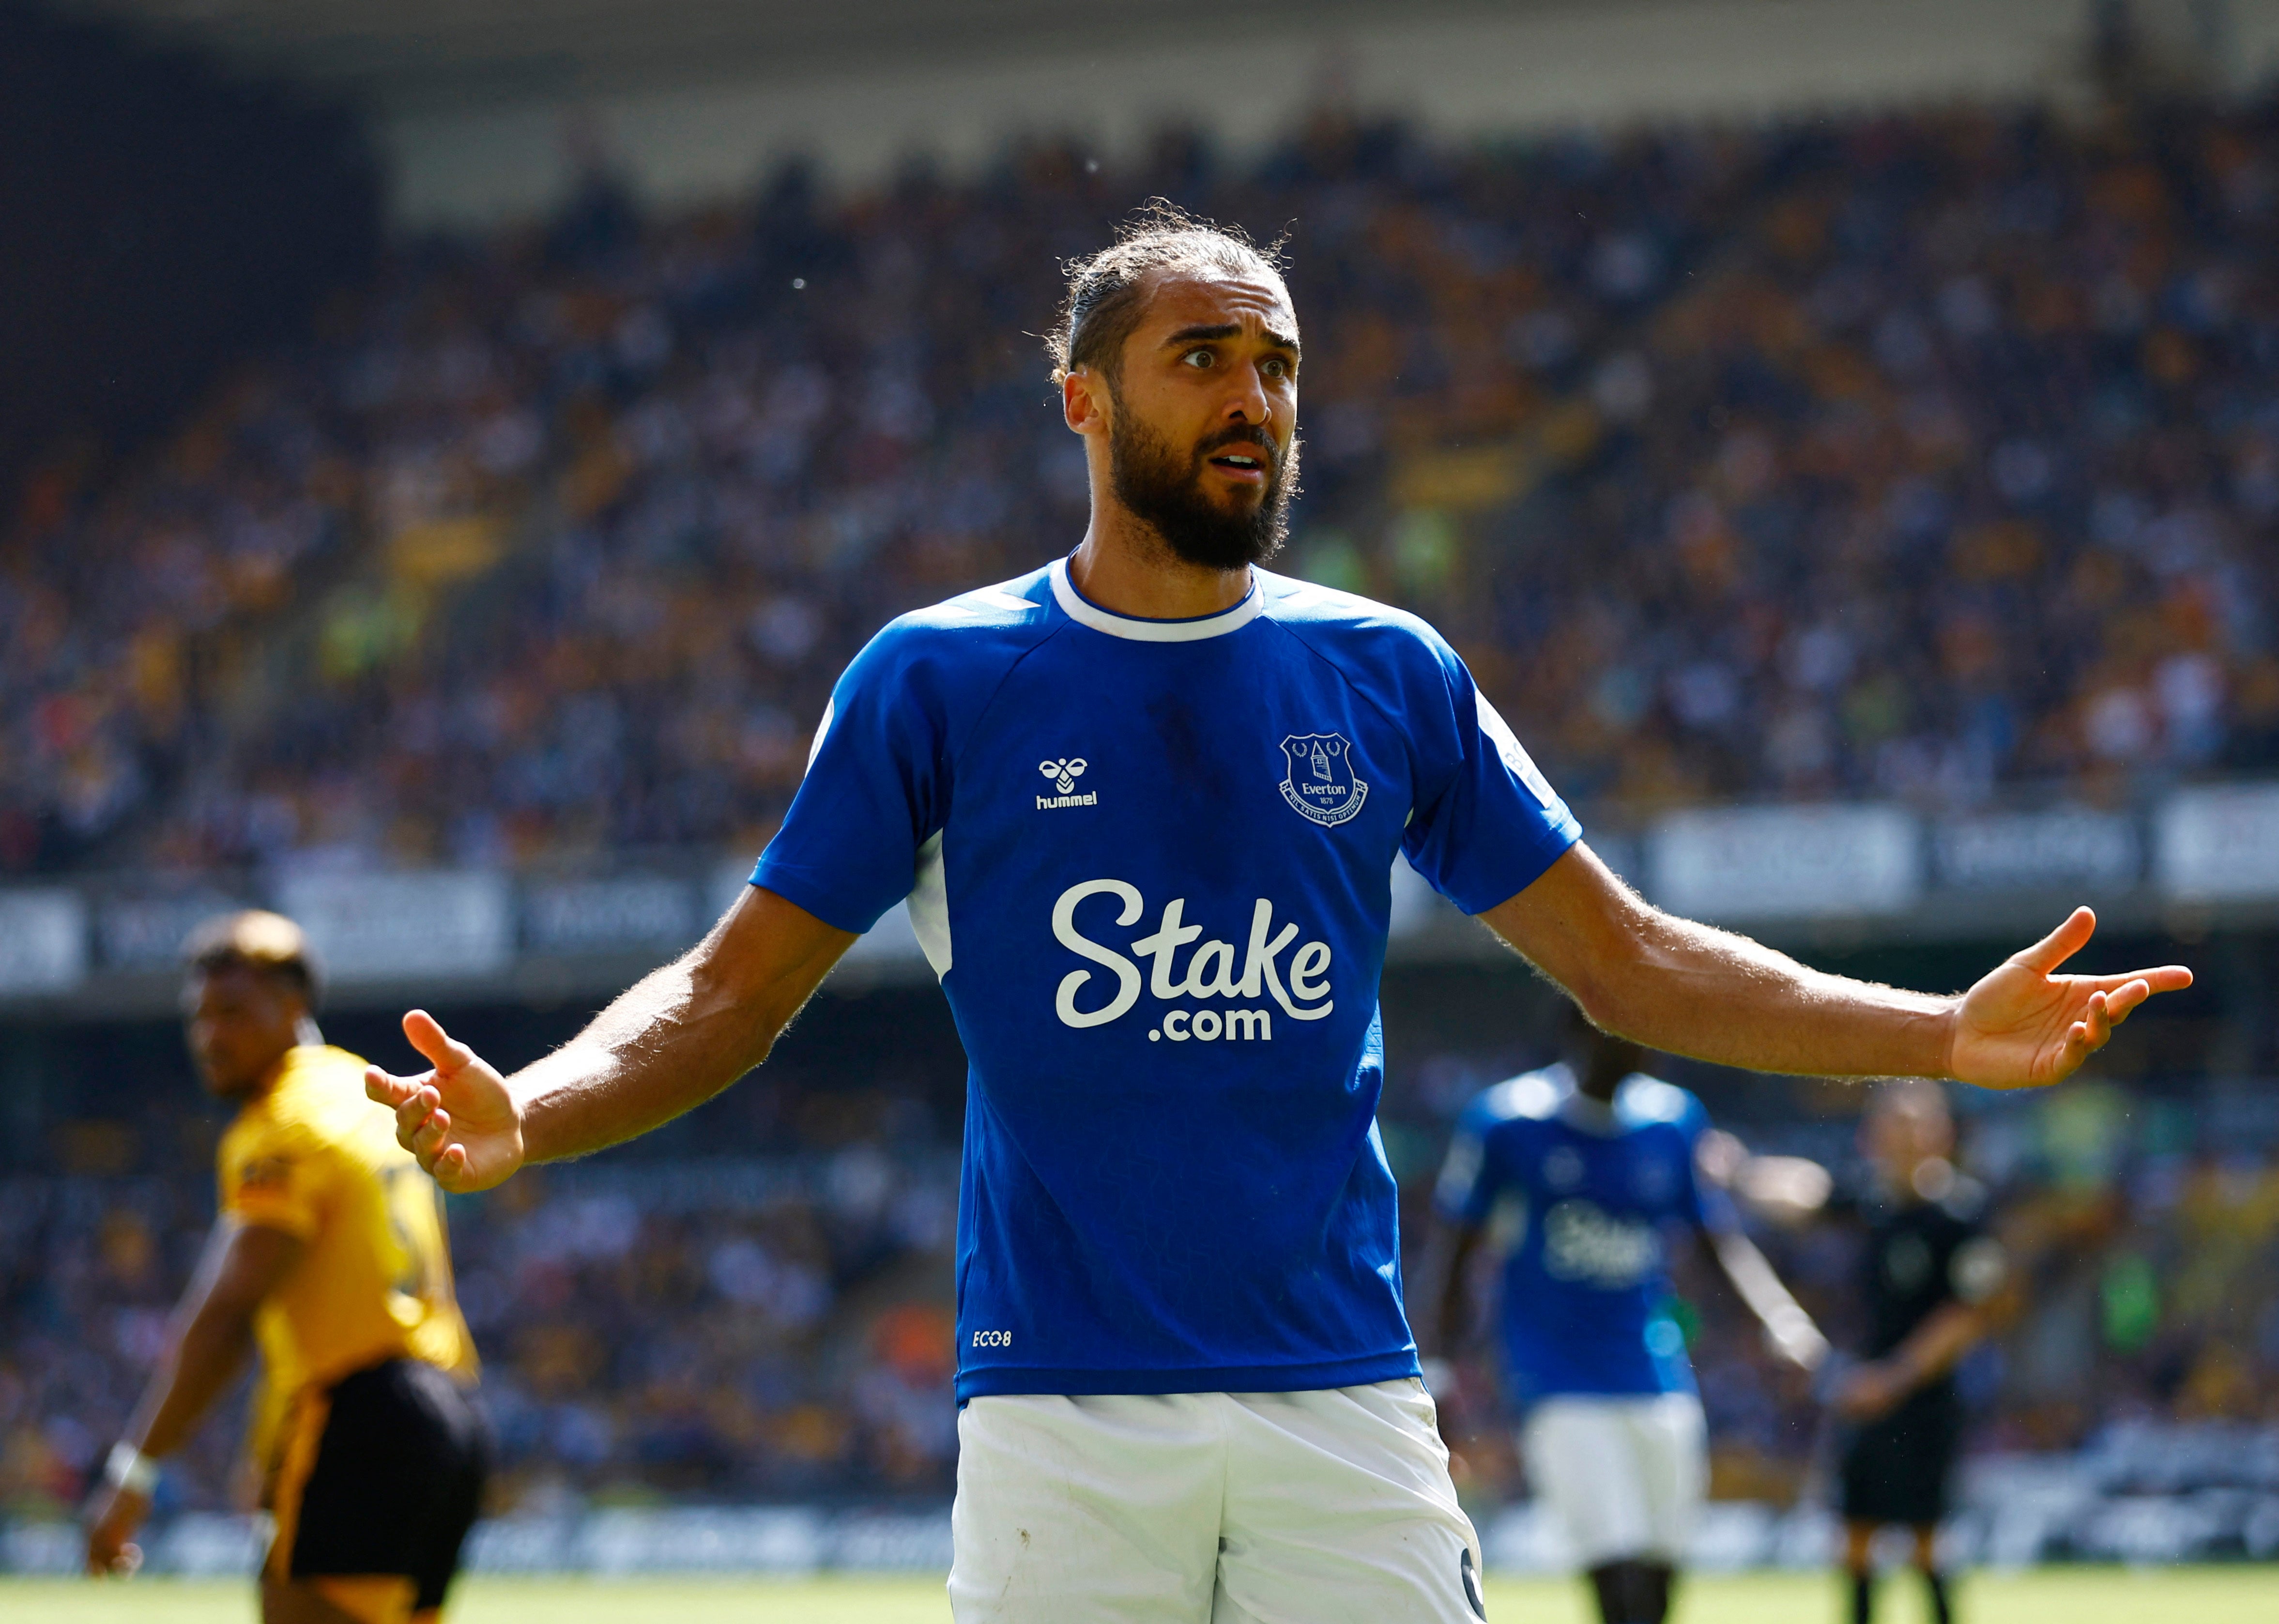 Dominic Calvert-Lewin might have been even more luckless than Dyche